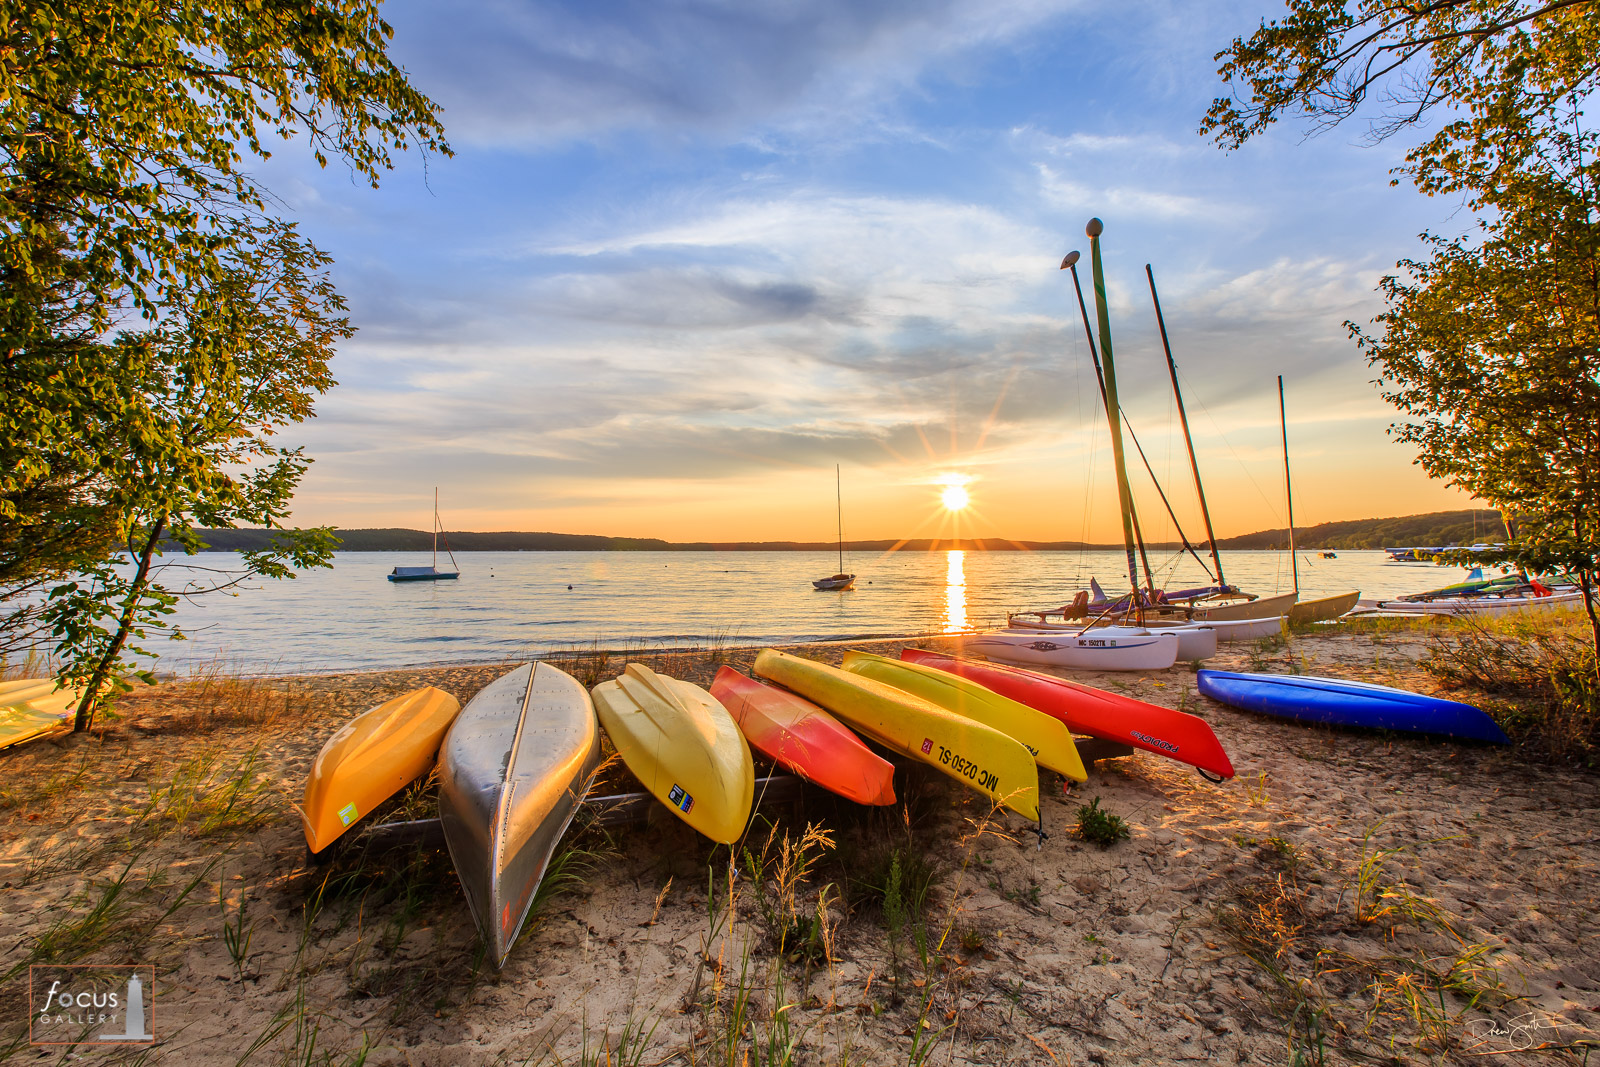 Sunset over Crystal Lake beach with canoes, kayaks and sailboats on the beach.